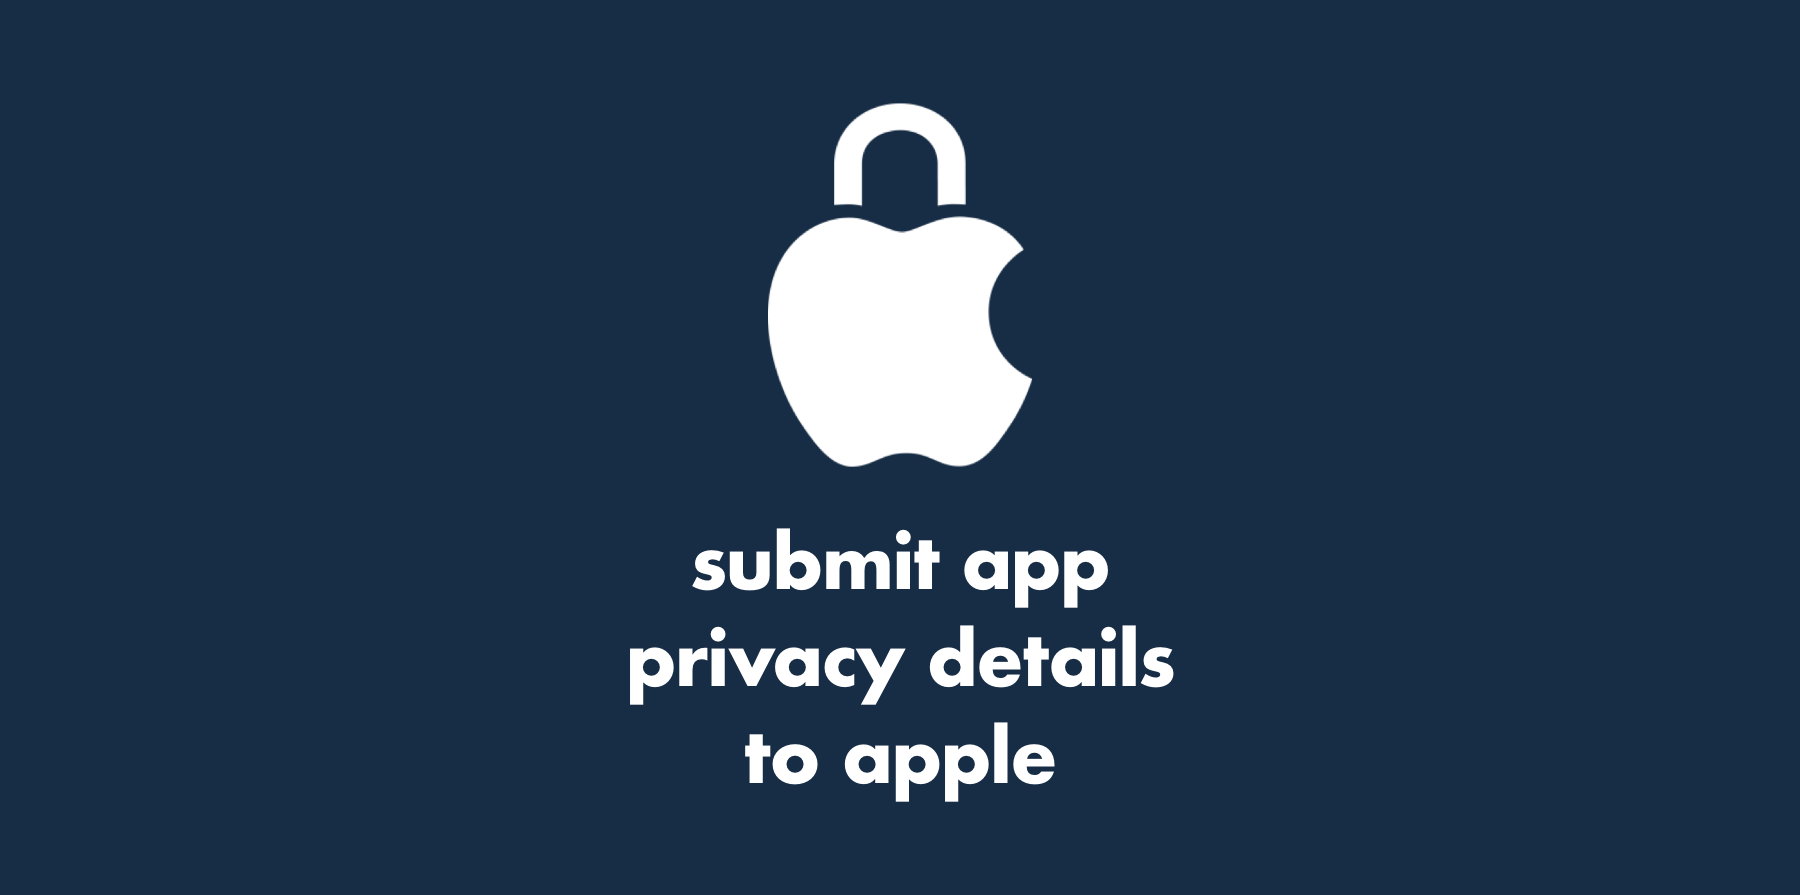 Submit App Privacy Details to Apple Image